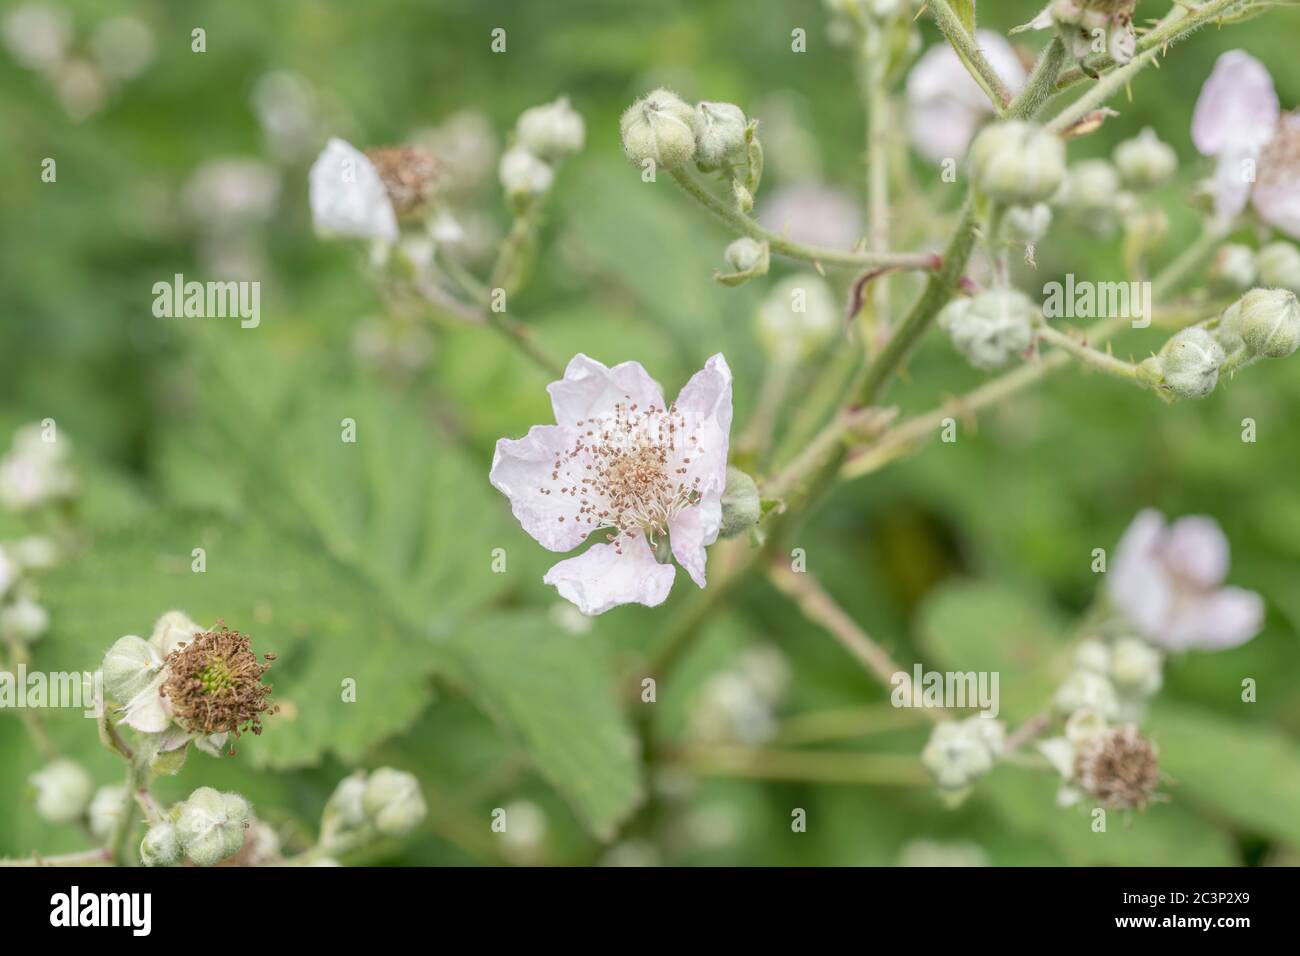 Pinky-white flower & flower buds of Bramble / Rubus fruticosus in UK hedgerow. Source of blackberries, obviously, and once used as a medicinal plant. Stock Photo